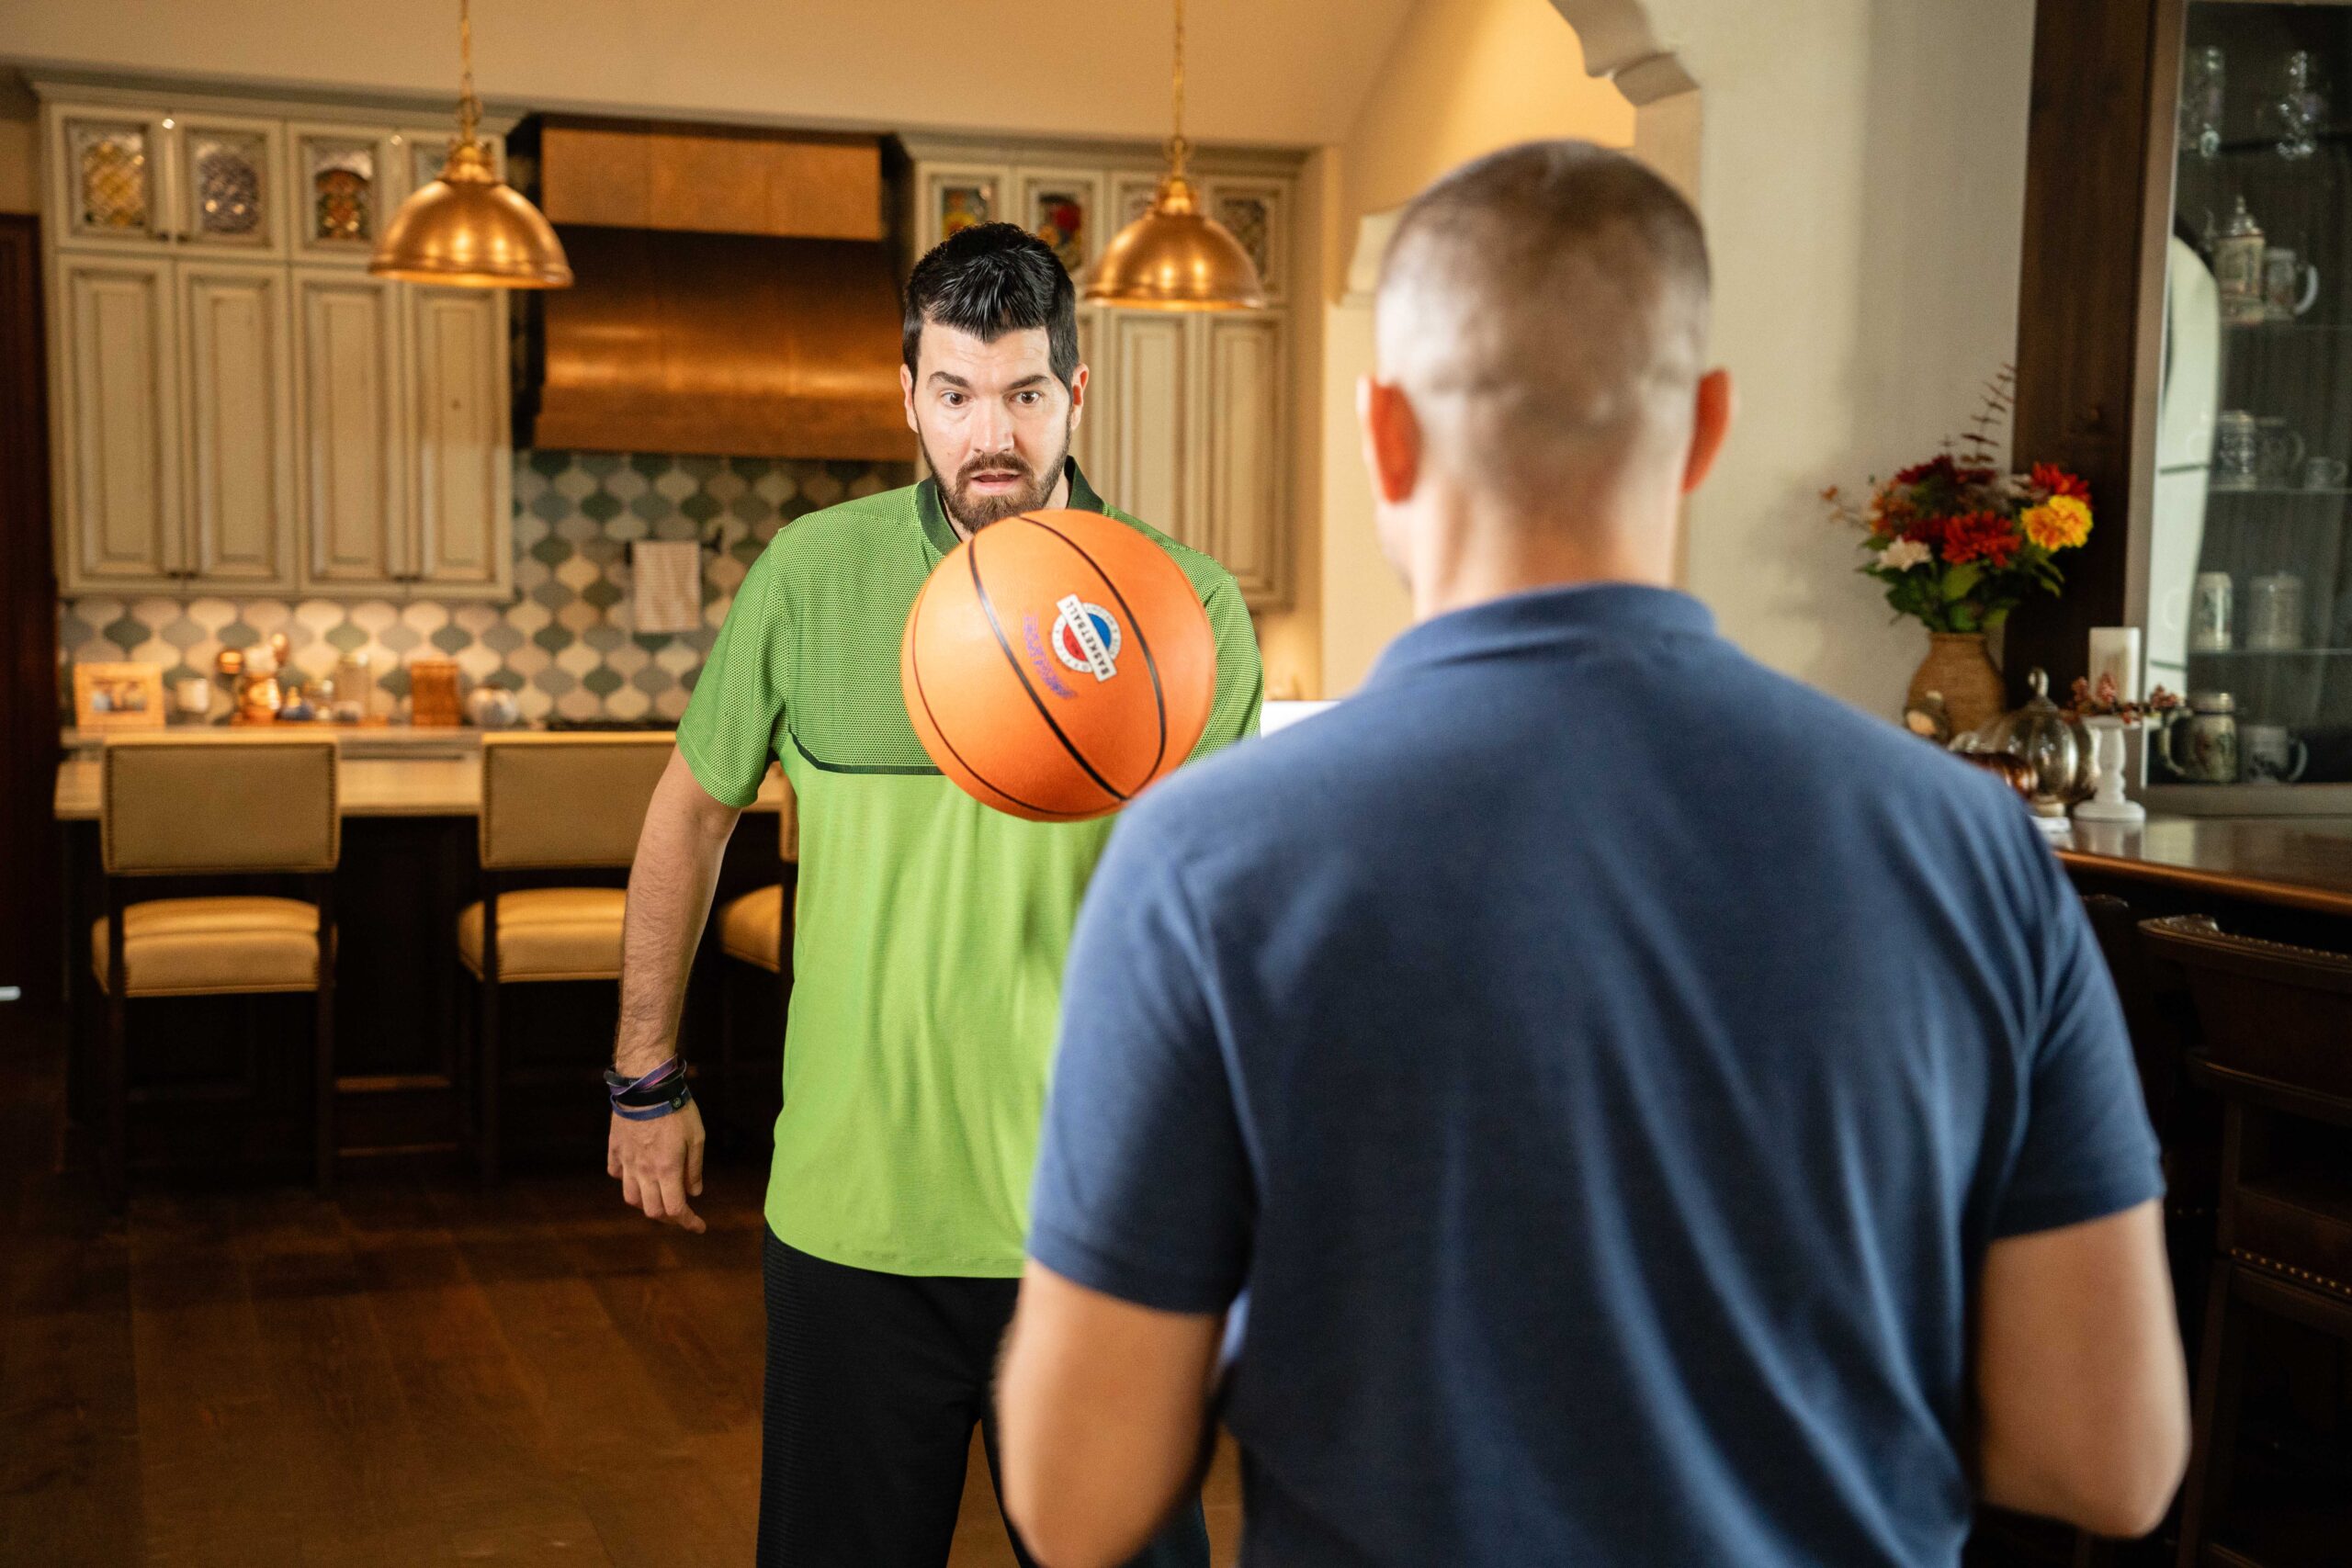 eric sorensen works on upper body coordination by tossing a basketball back and forth. 